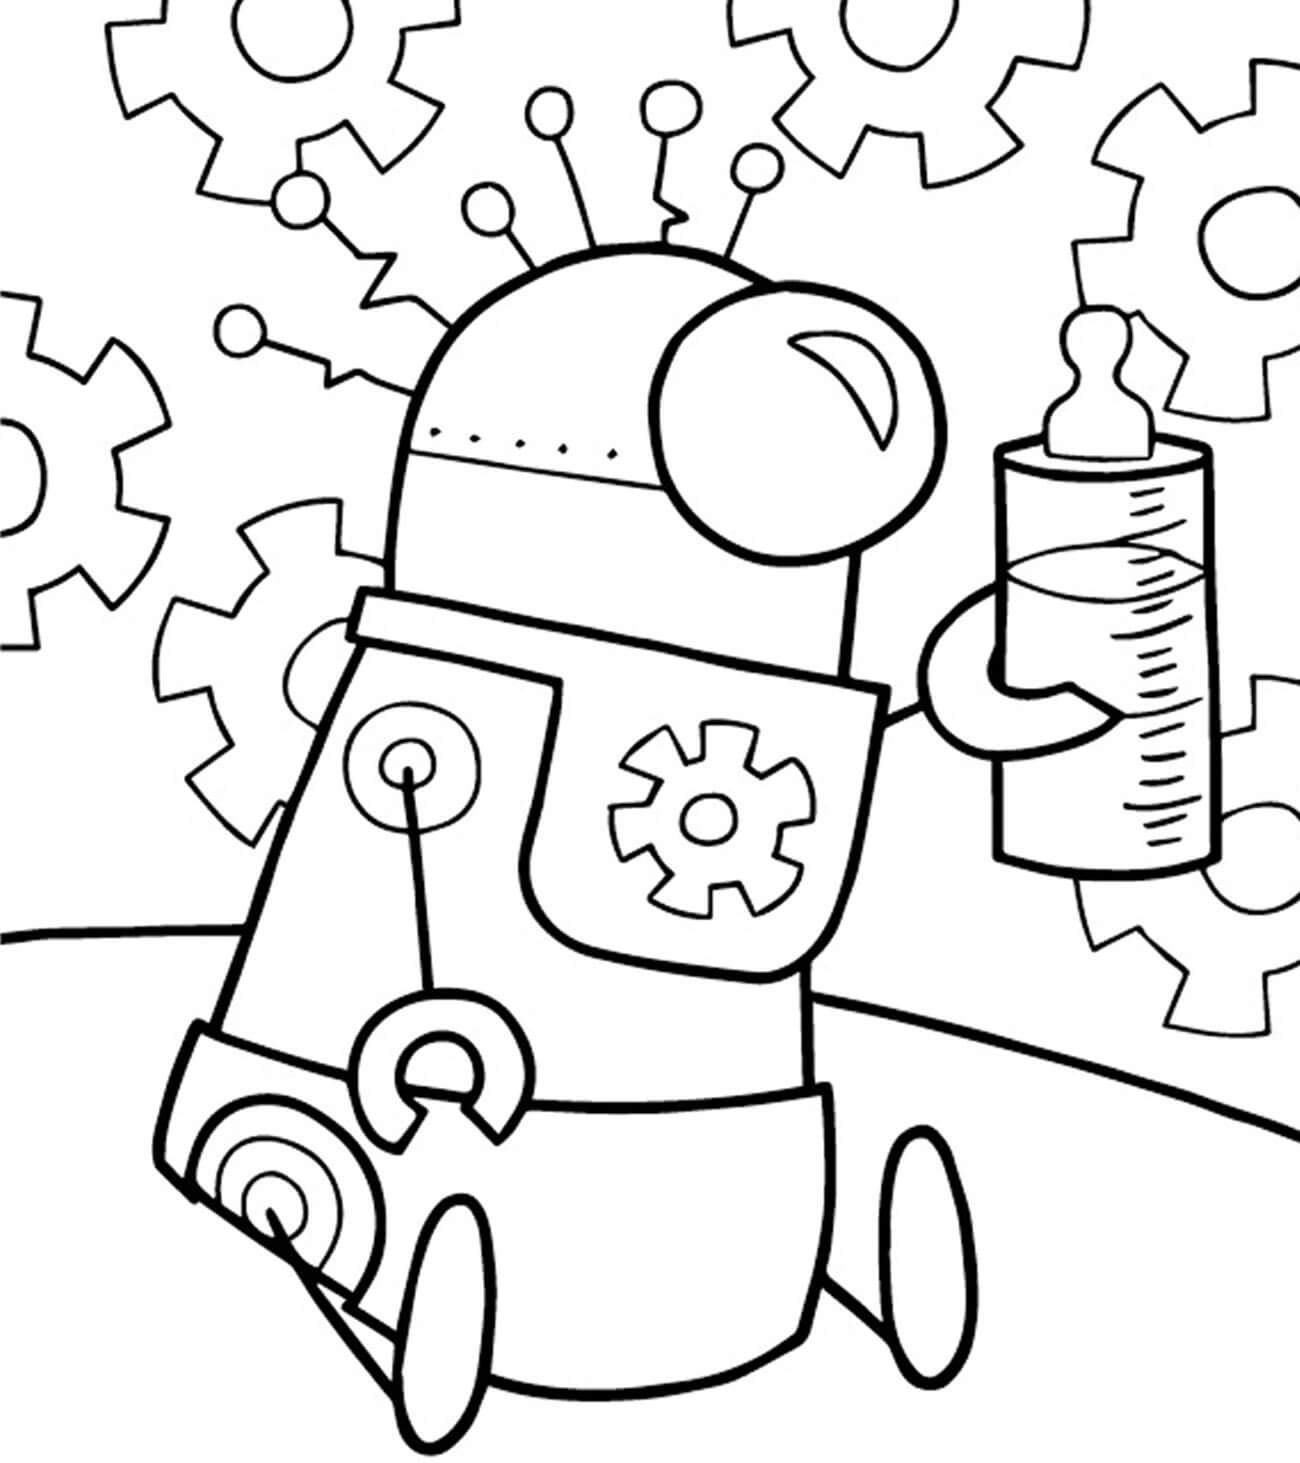 Lego Robot Coloring Page - Free Printable Coloring Pages for Kids